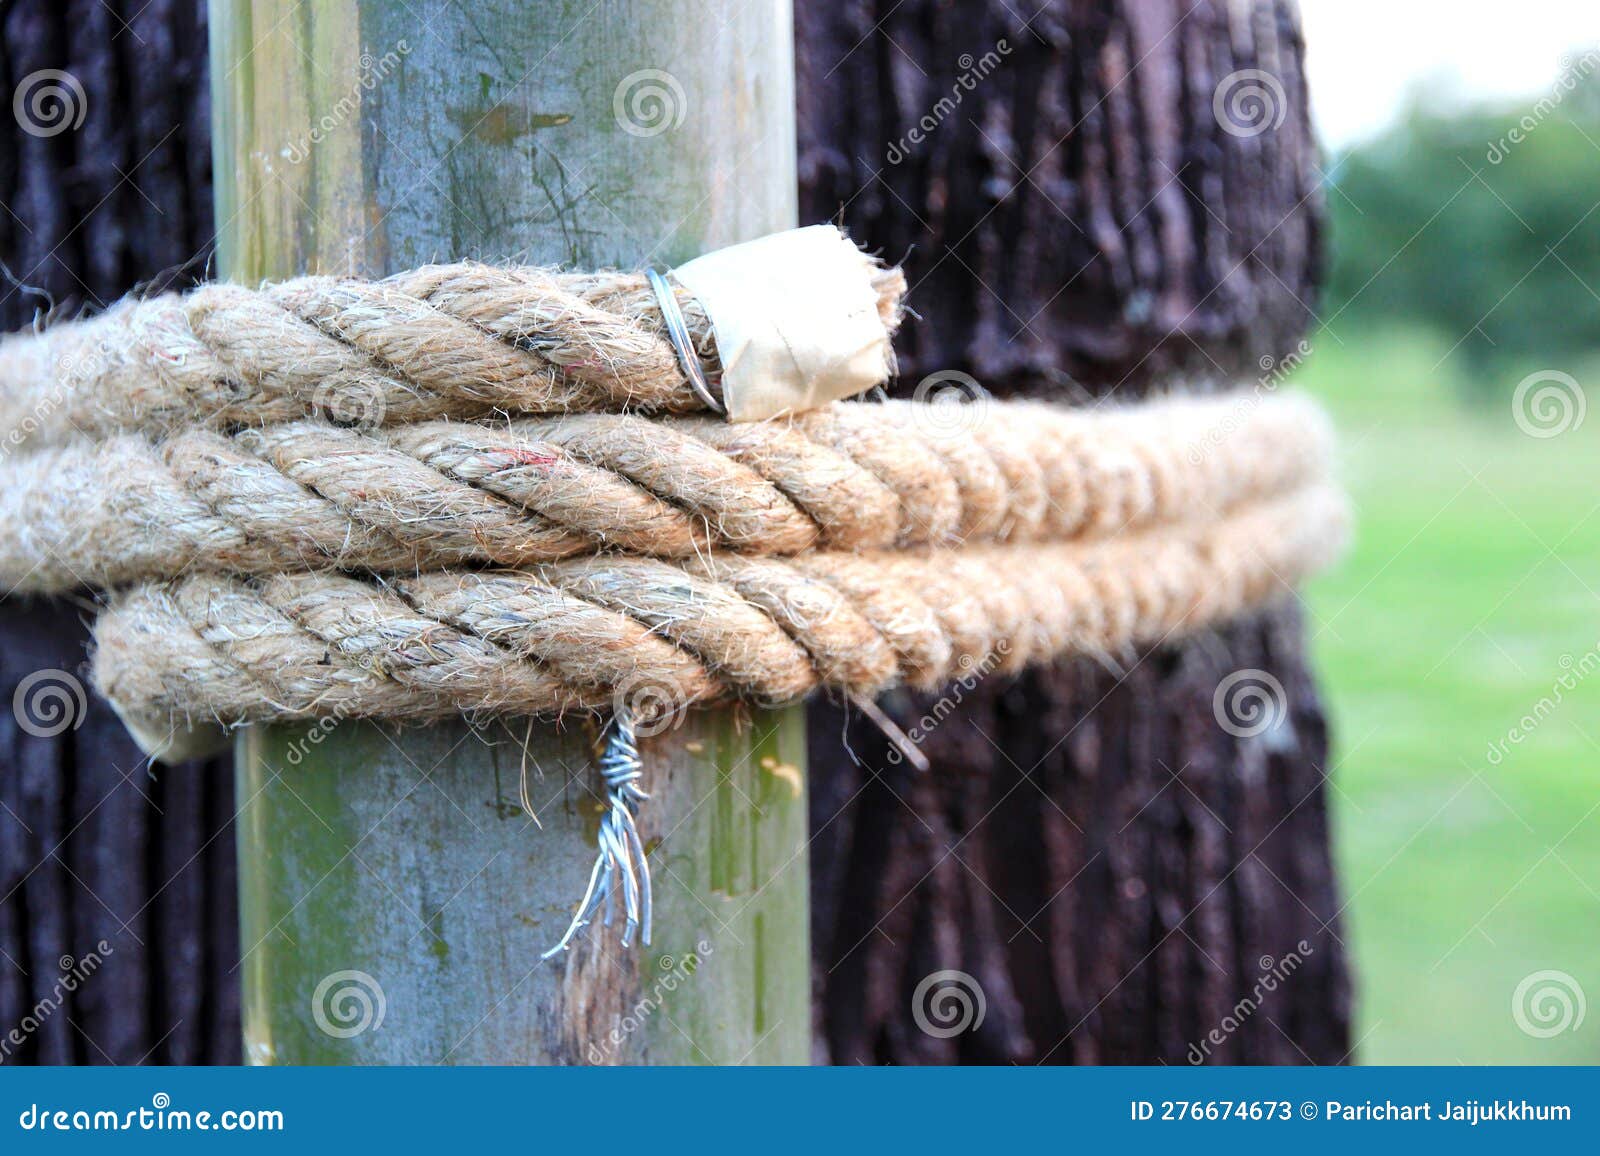 Tie a Large Rope in an Orderly Way To Hold Things Firmly Stock Image -  Image of pattern, material: 276674673